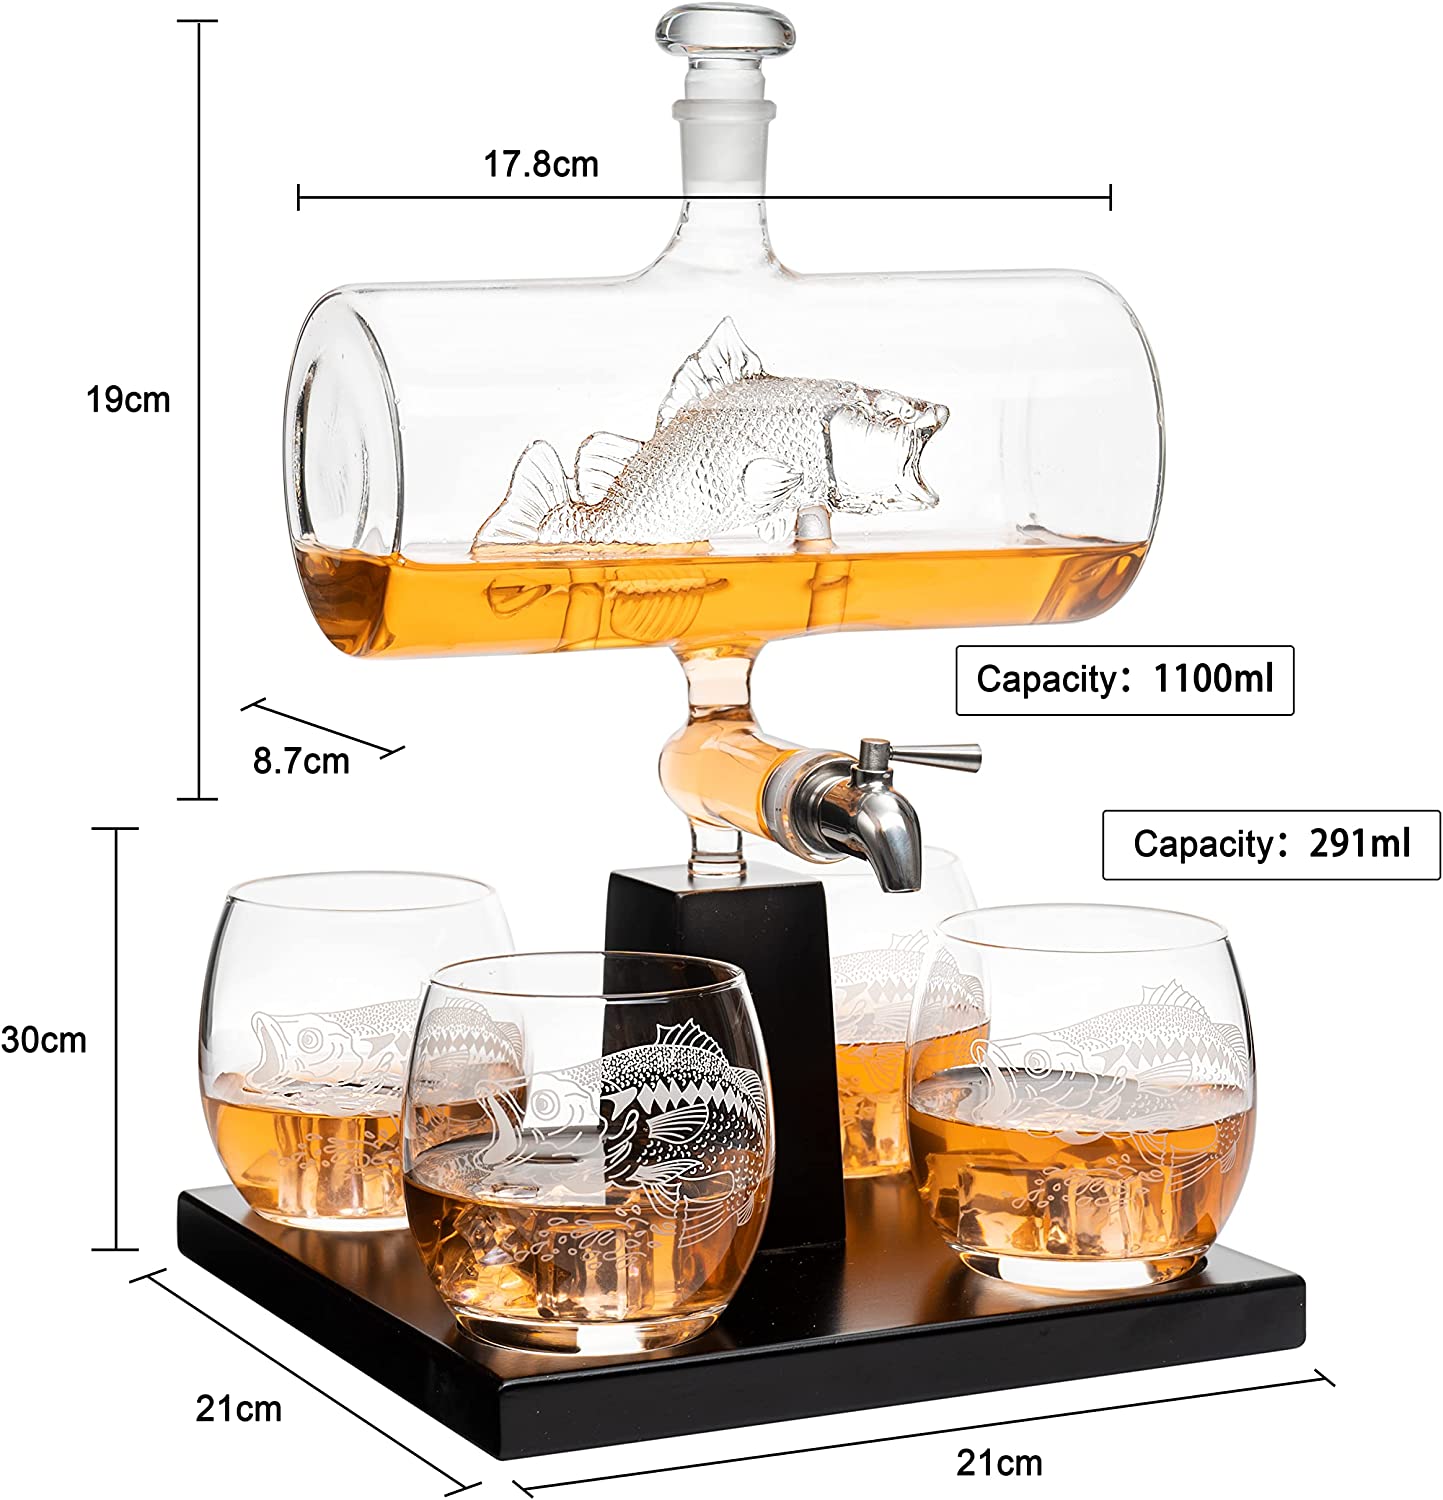 Bass Fish Wine & Whiskey Decanter Set 1100ml by The Wine Savant with 4 Bass Whiskey Glasses, Fishing Gifts, Fisherman Gifts, Boating Gifts, Drink Dispenser Scotch, Bourbon,Gifts for Dad-3